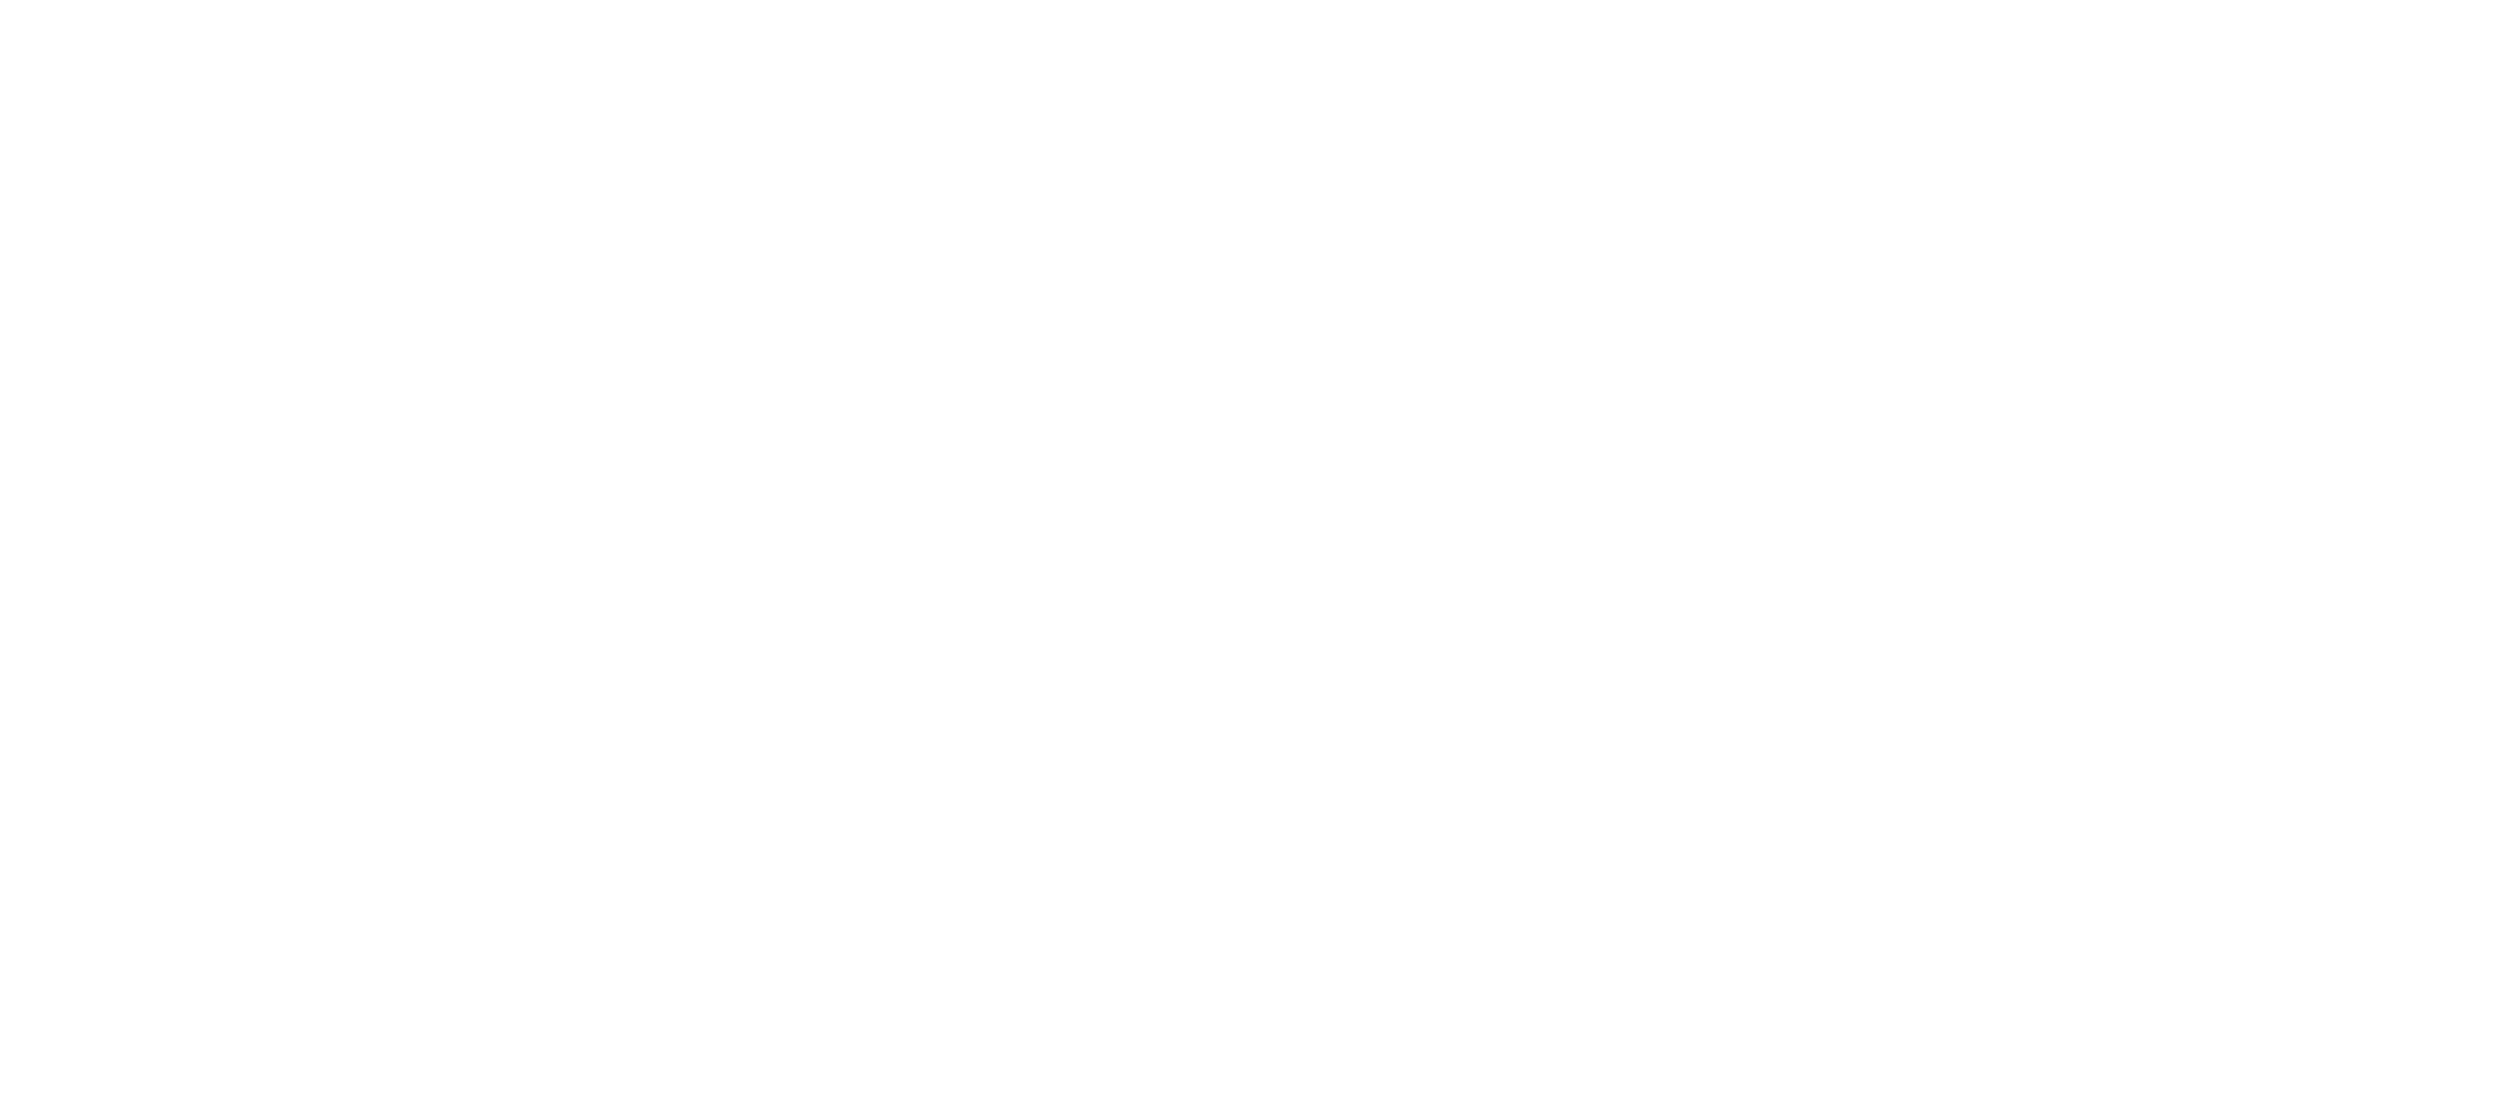 Great Commission Association of Southern Baptist Churches